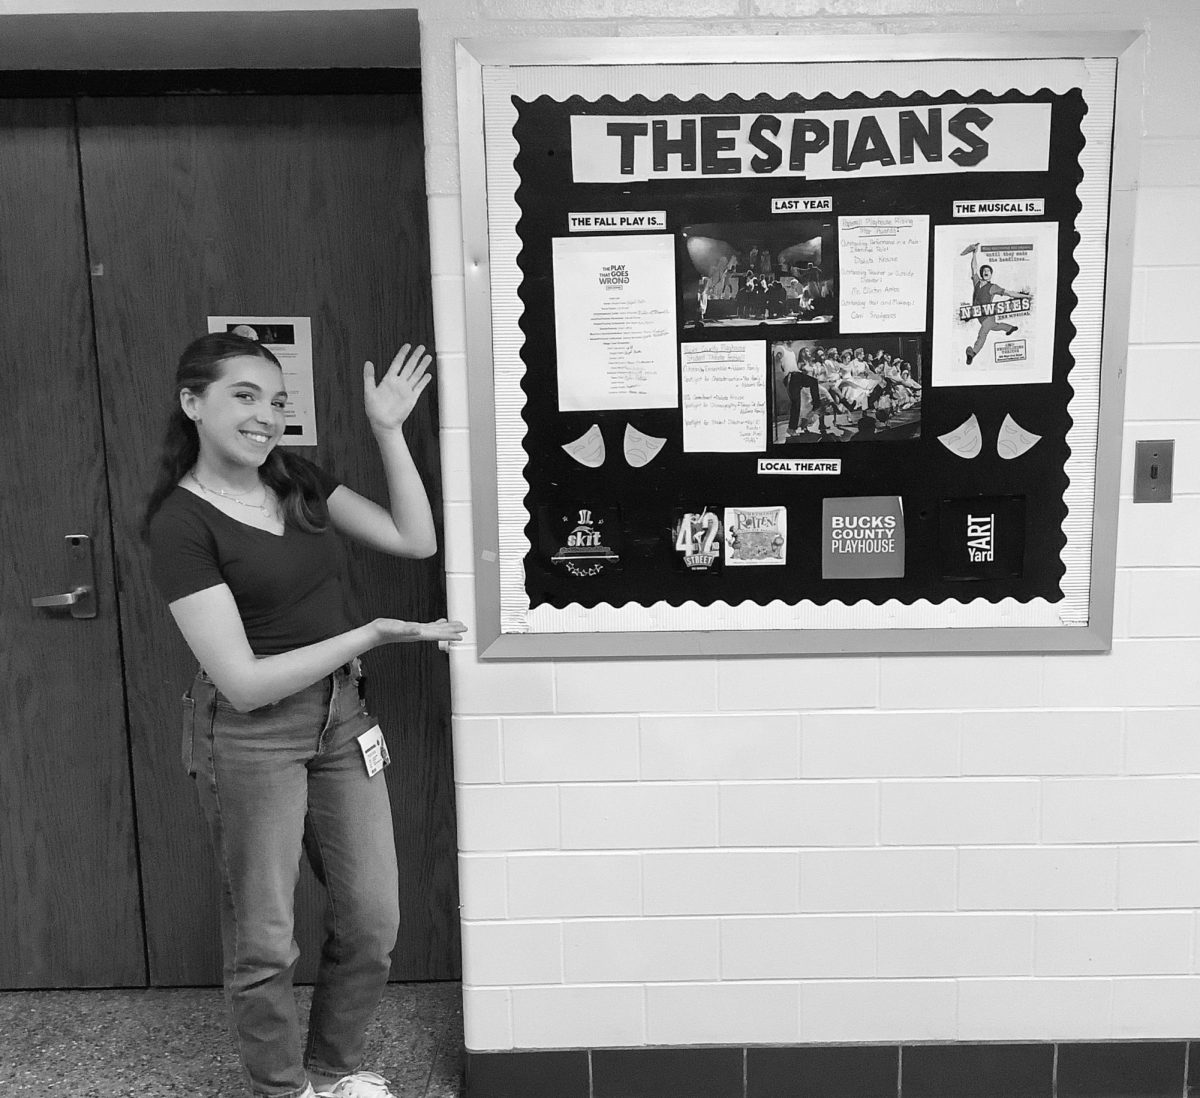 Reporter+Jocelyn+Denne+directs+students+to+check+out+the+Thespians+bulletin+board+outside+of+the+theater.